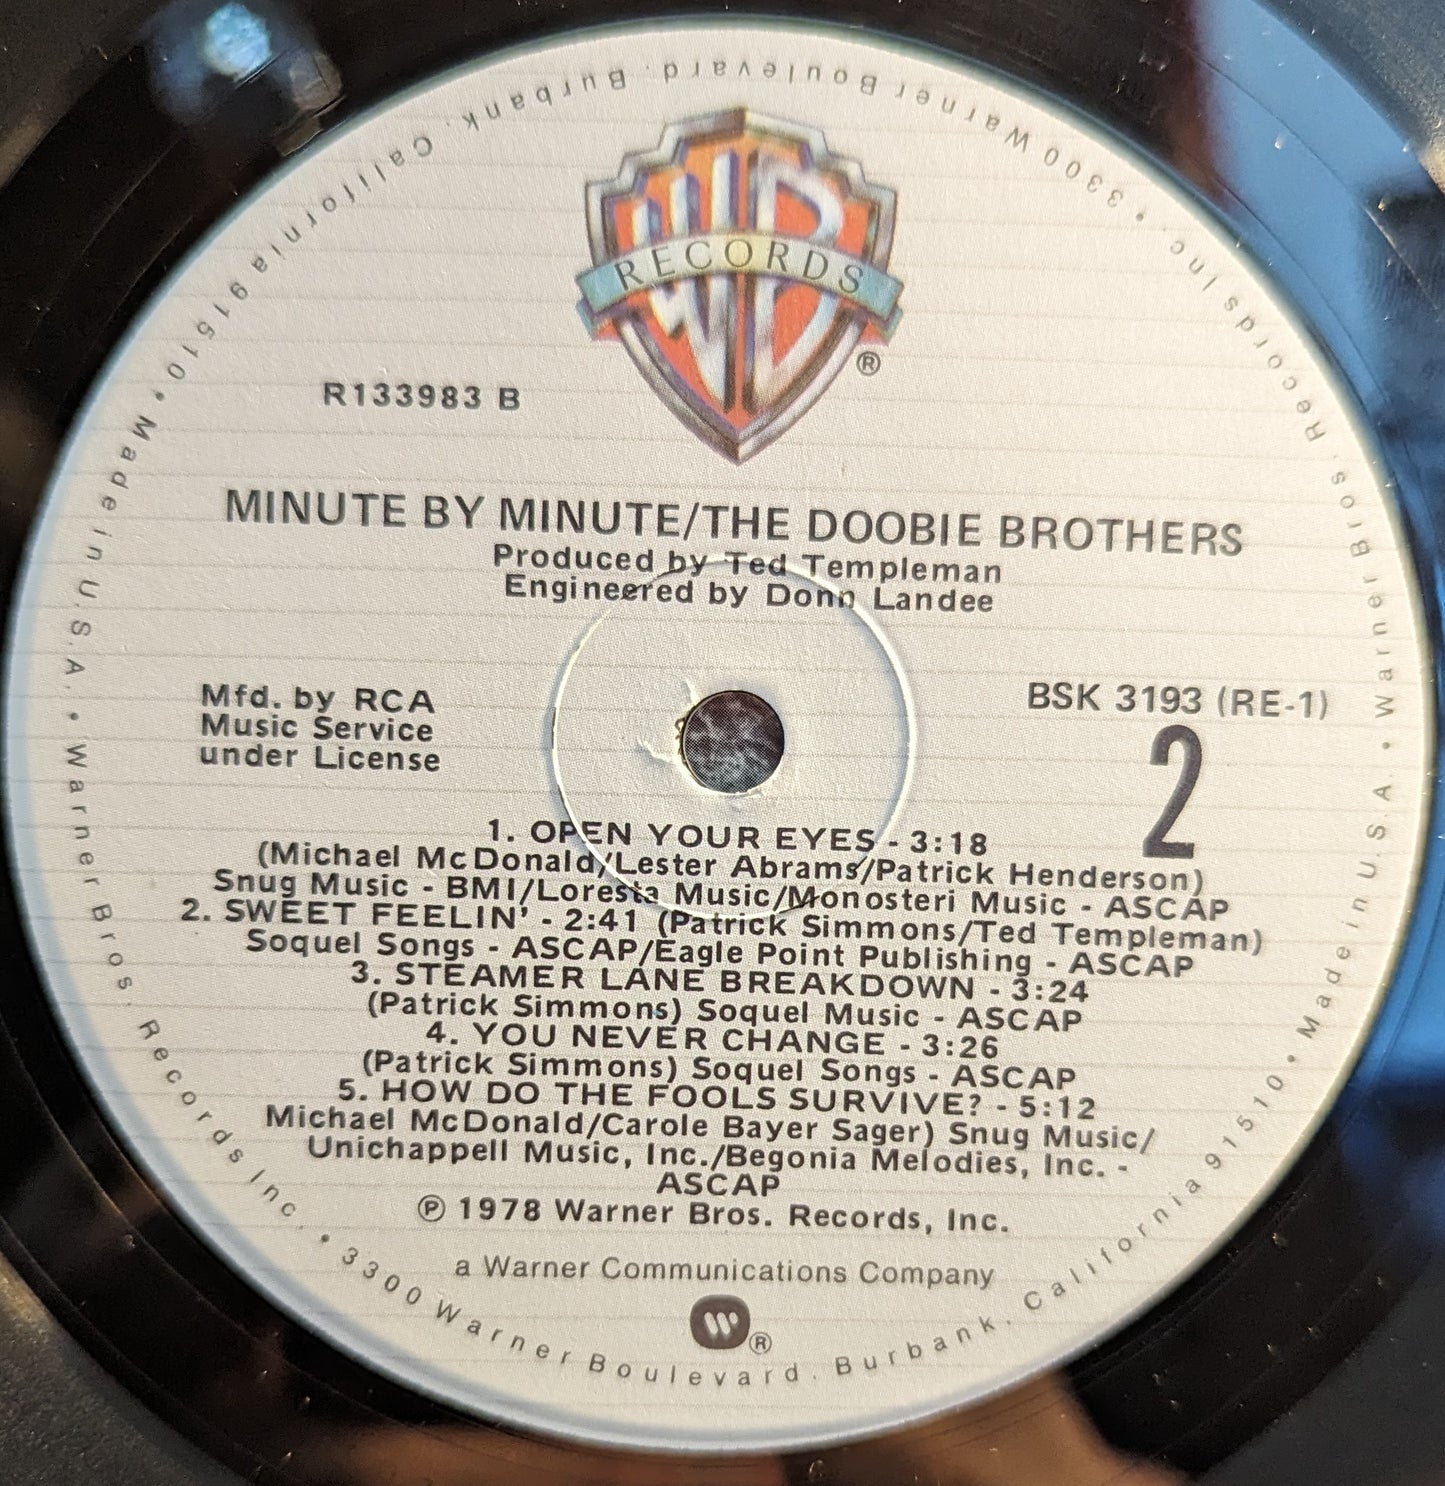 The Doobie Brothers Minute By Minute *RCA CLUB* LP Near Mint (NM or M-) Very Good Plus (VG+)